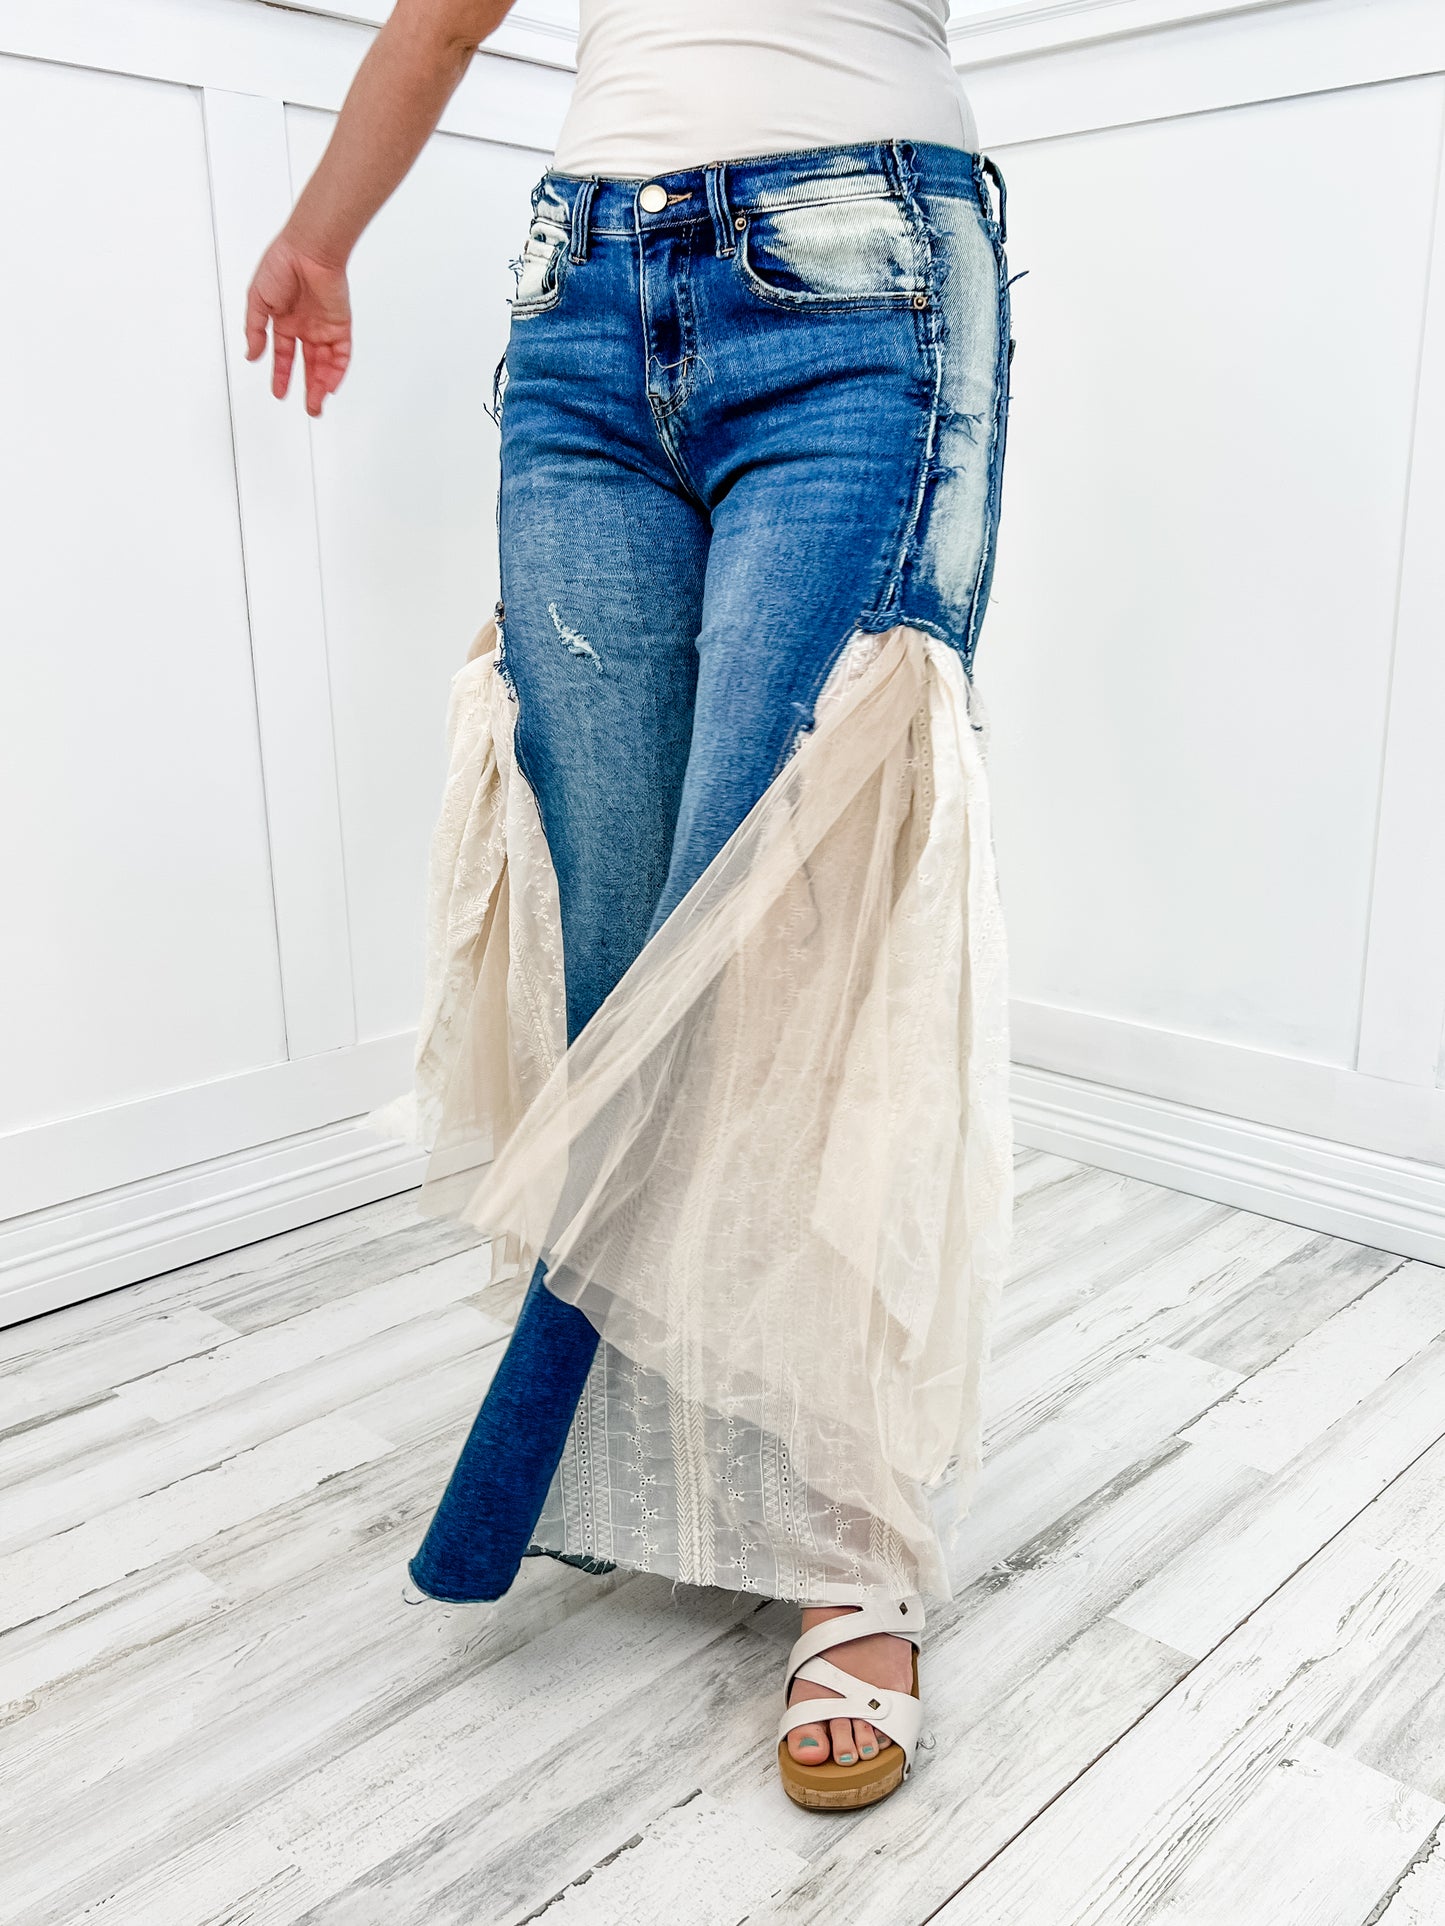 Making a Statement Lace Jeans